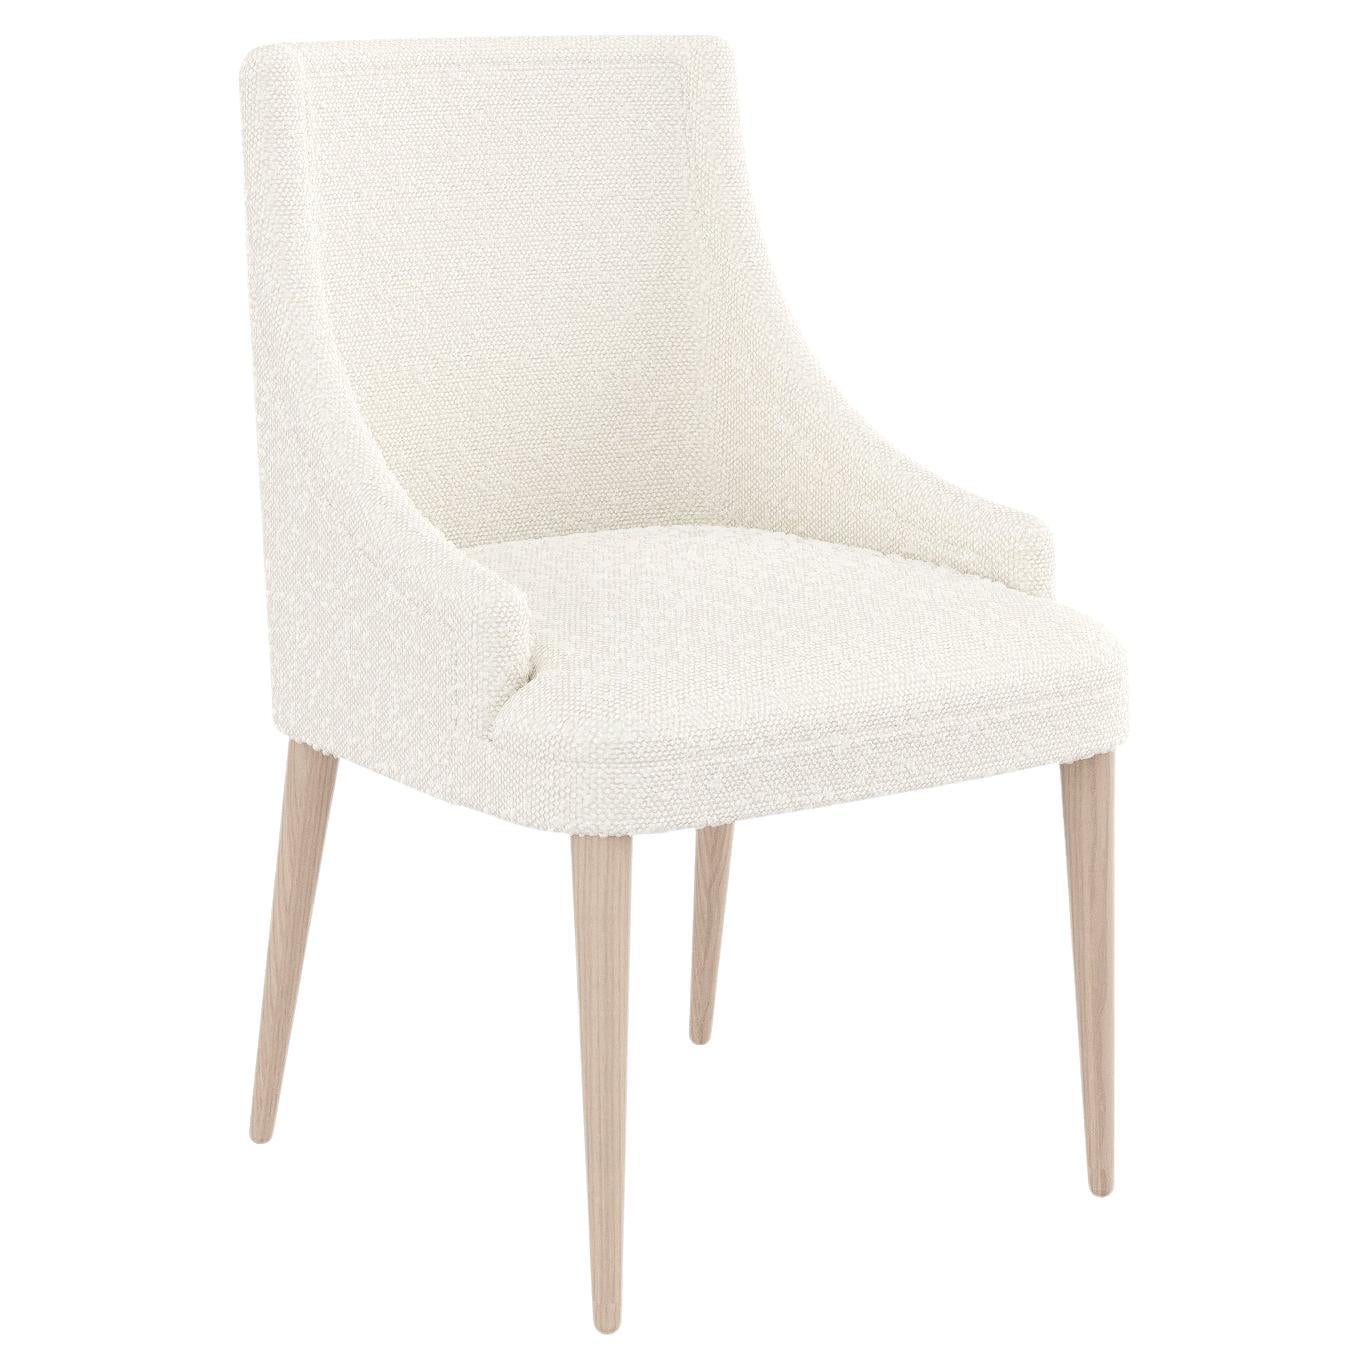 CORDOBA S dining chair with solid wood legs For Sale